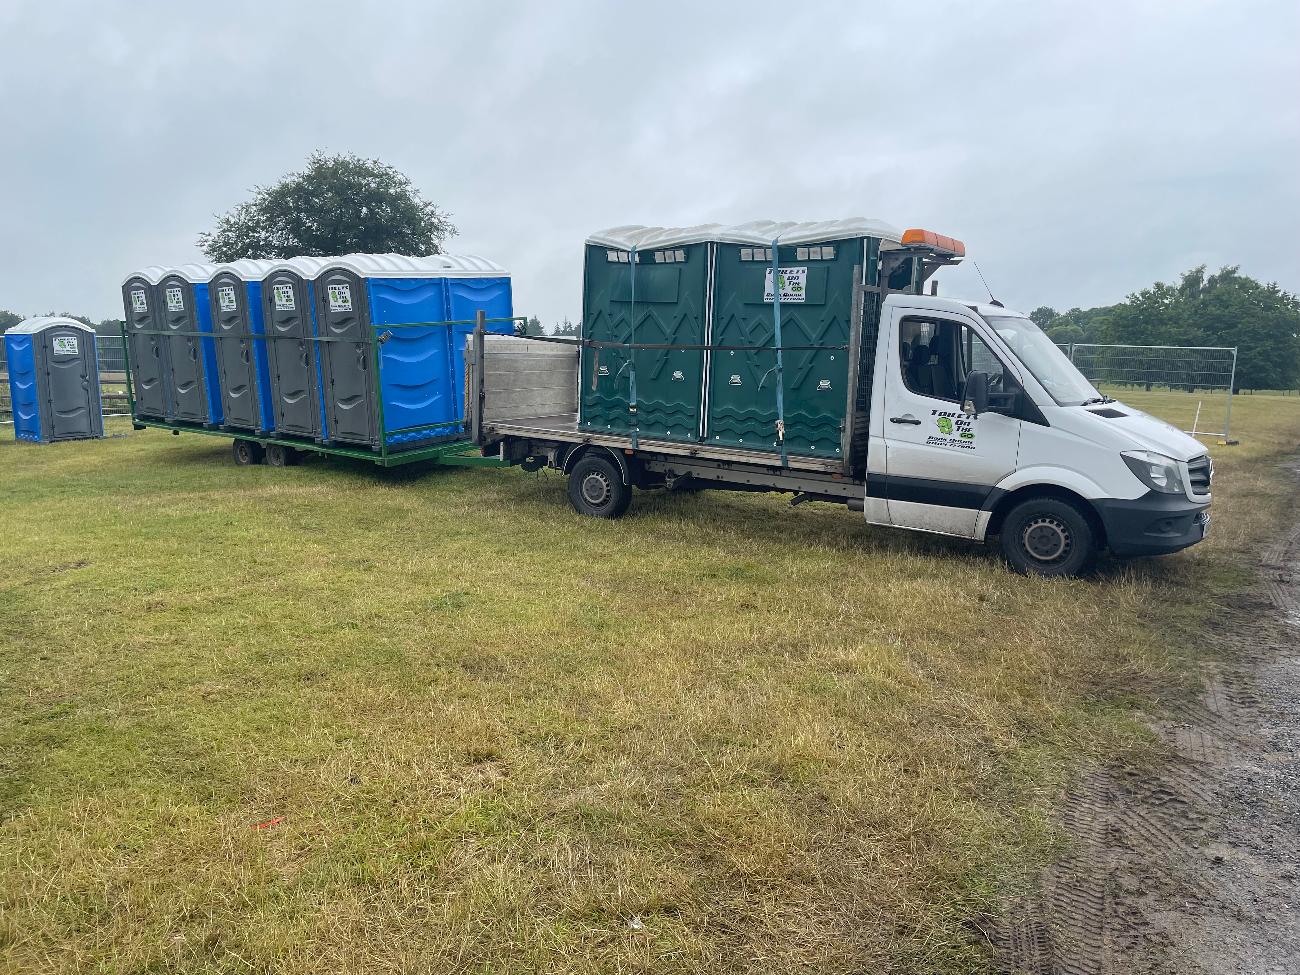 Gallery | Portable Toilet Loo Hire Rental Company in North West uk and Manchester gallery image 21